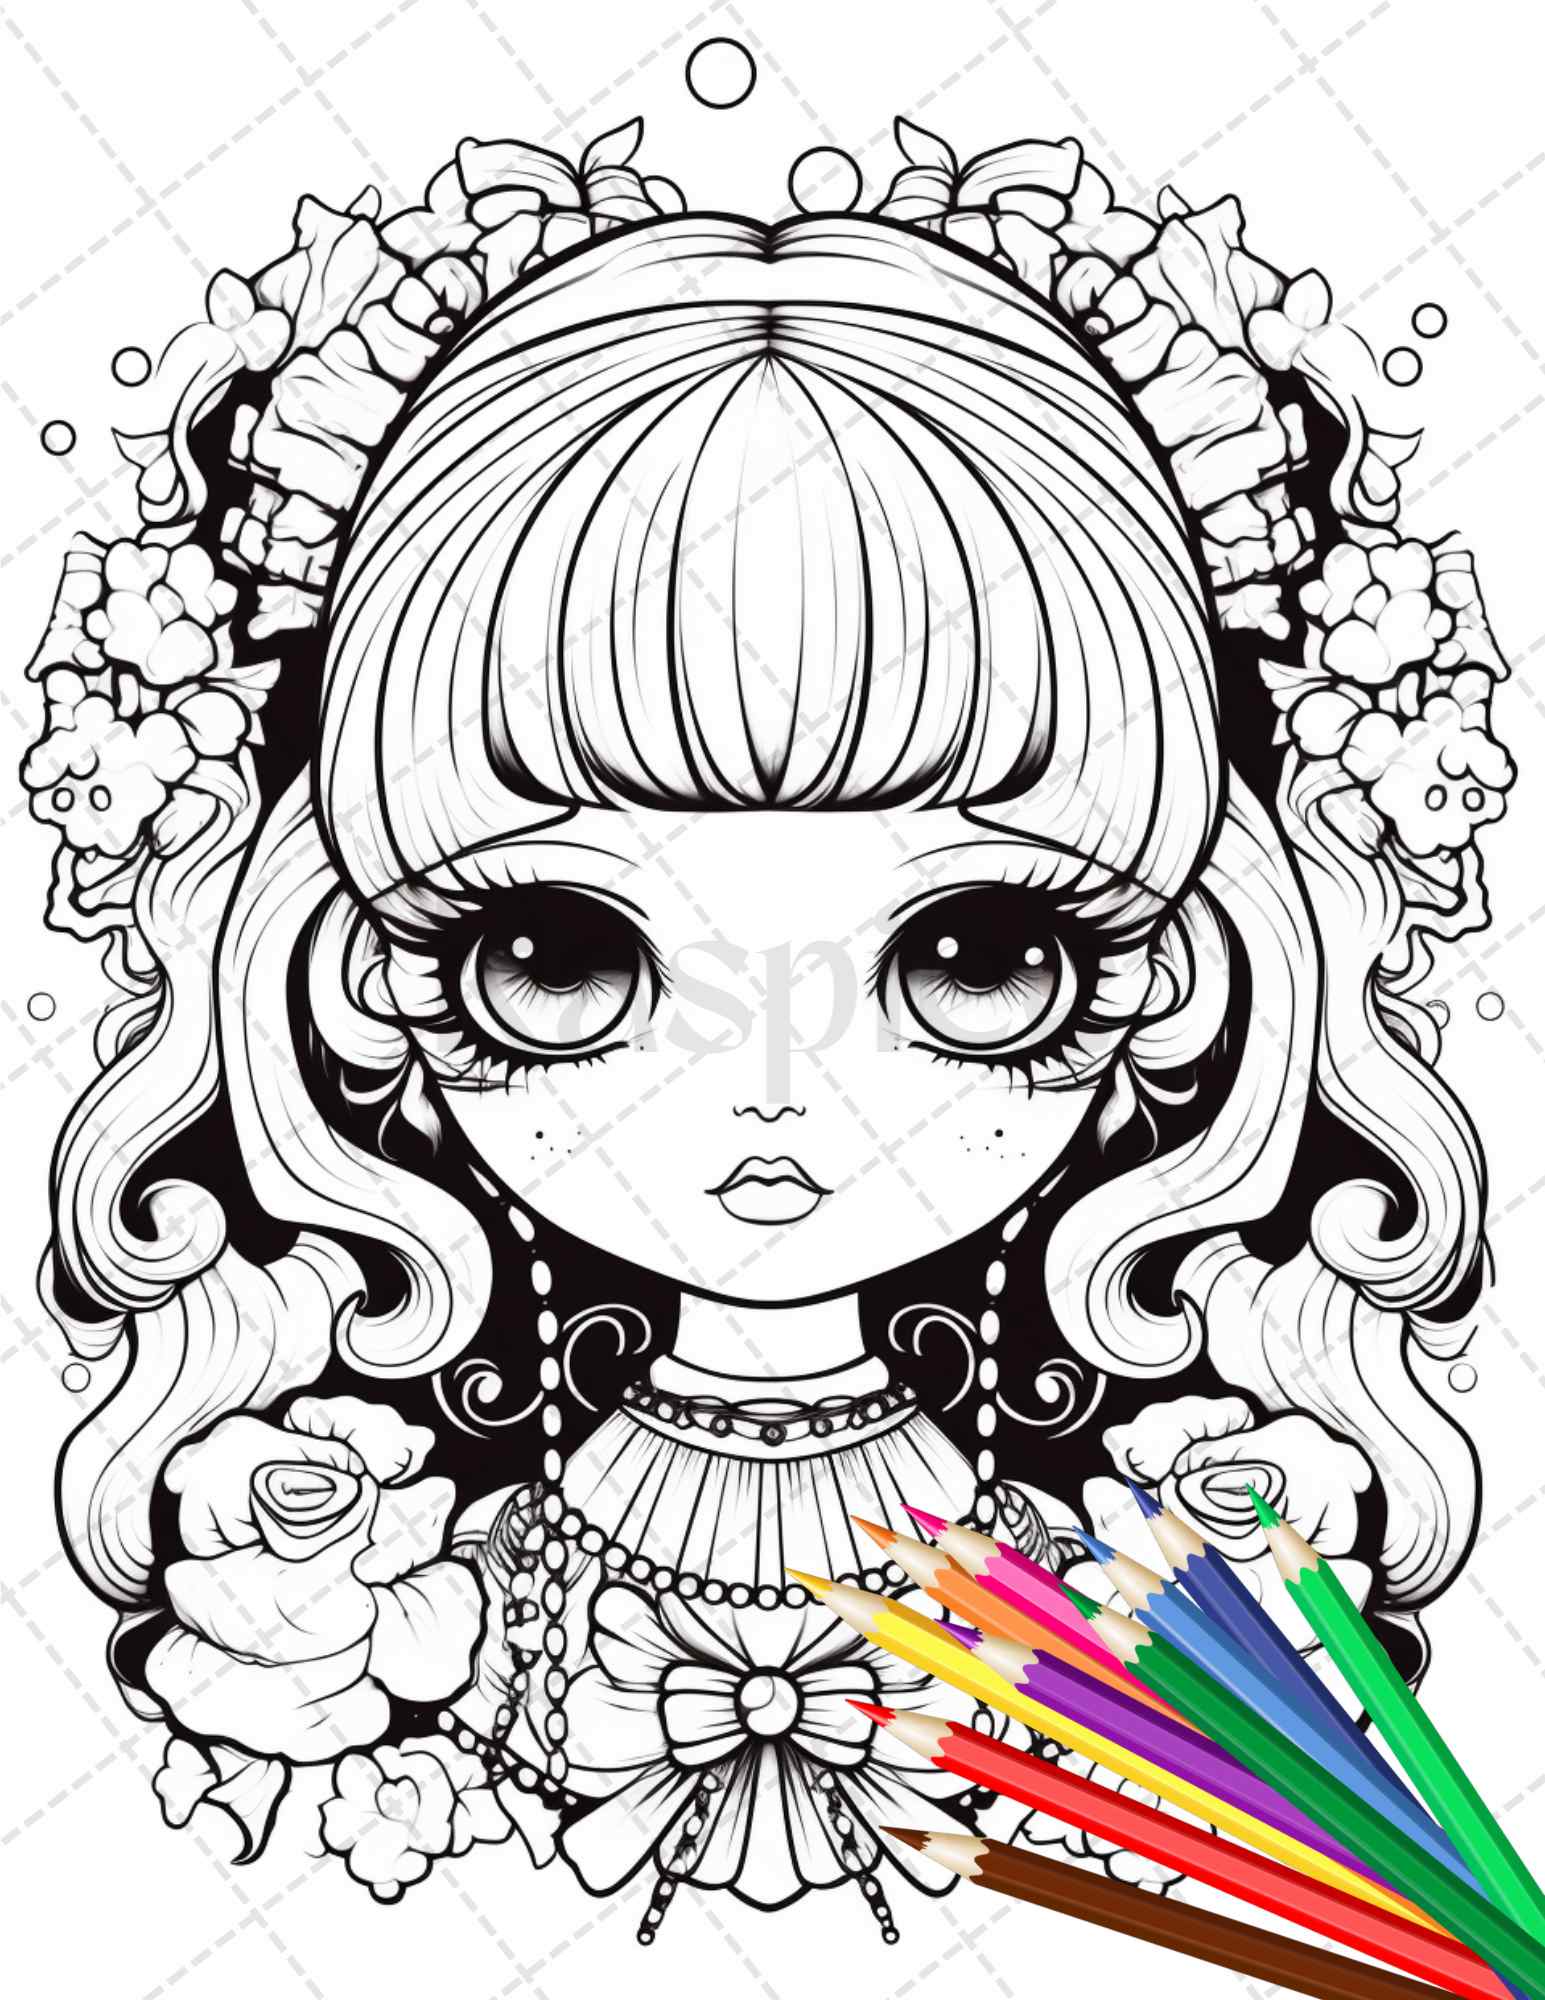 32 Creepy Kawaii Pastel Goth Coloring Pages Printable for Adults, Grayscale Coloring Page, PDF File Instant Download - raspiee